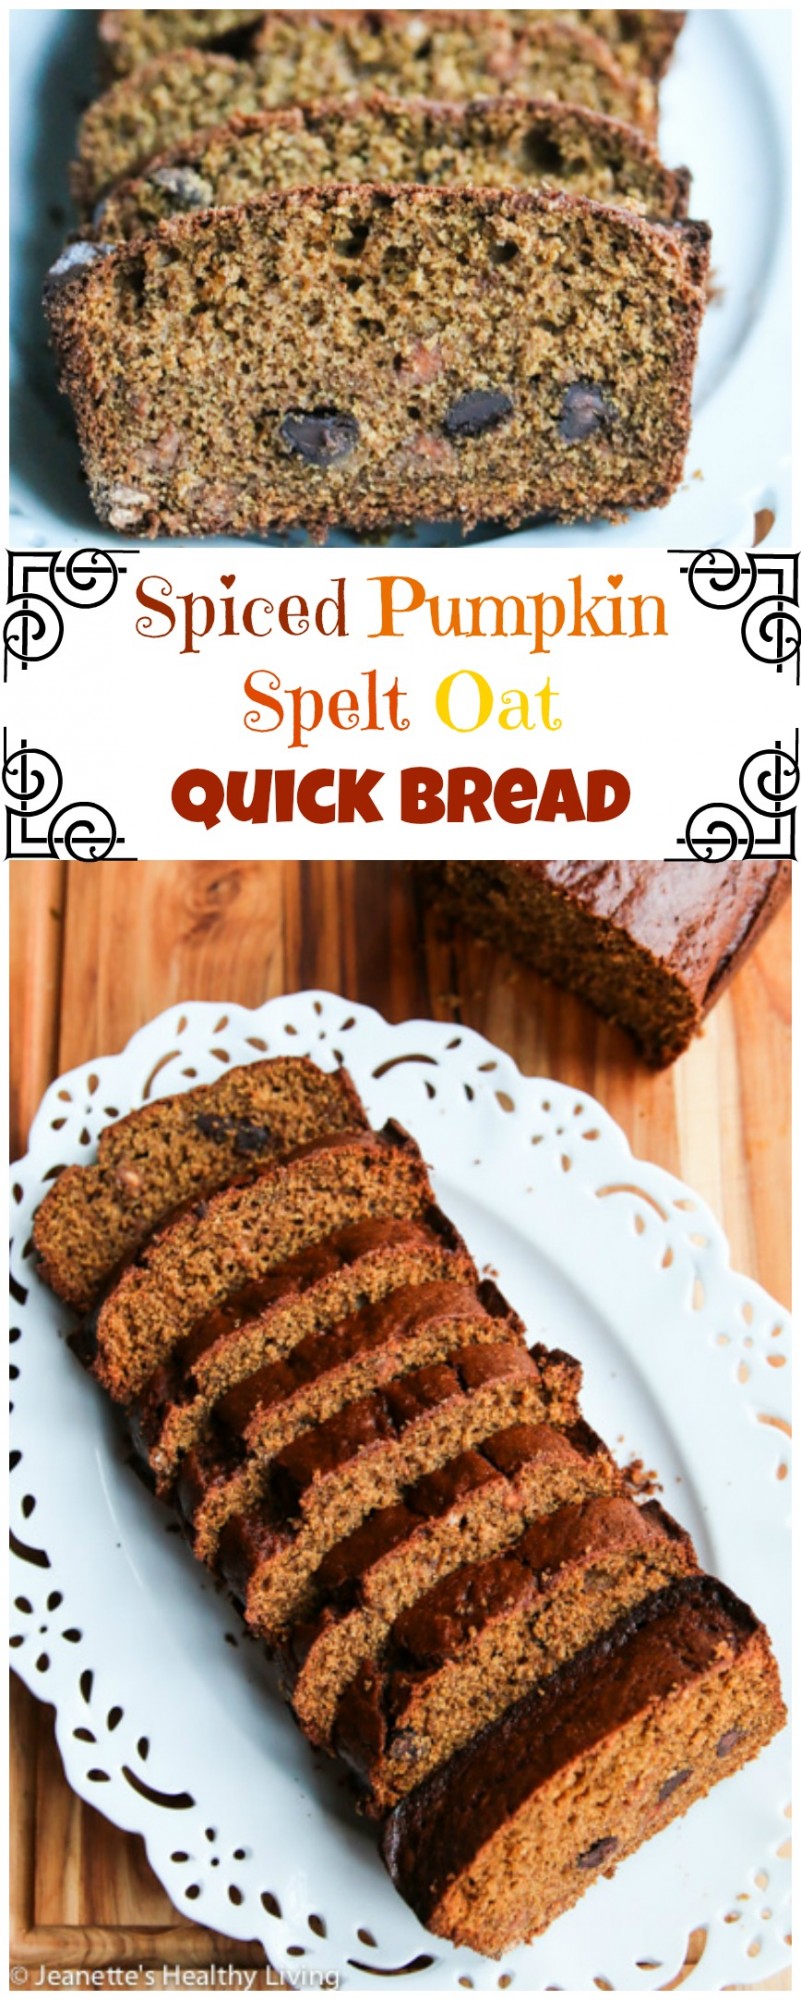 Spiced Pumpkin Spelt Oat Quick Bread - perfect for breakfast or tea, this quick bread is made with whole grain spelt, oat flour and flaxseeds